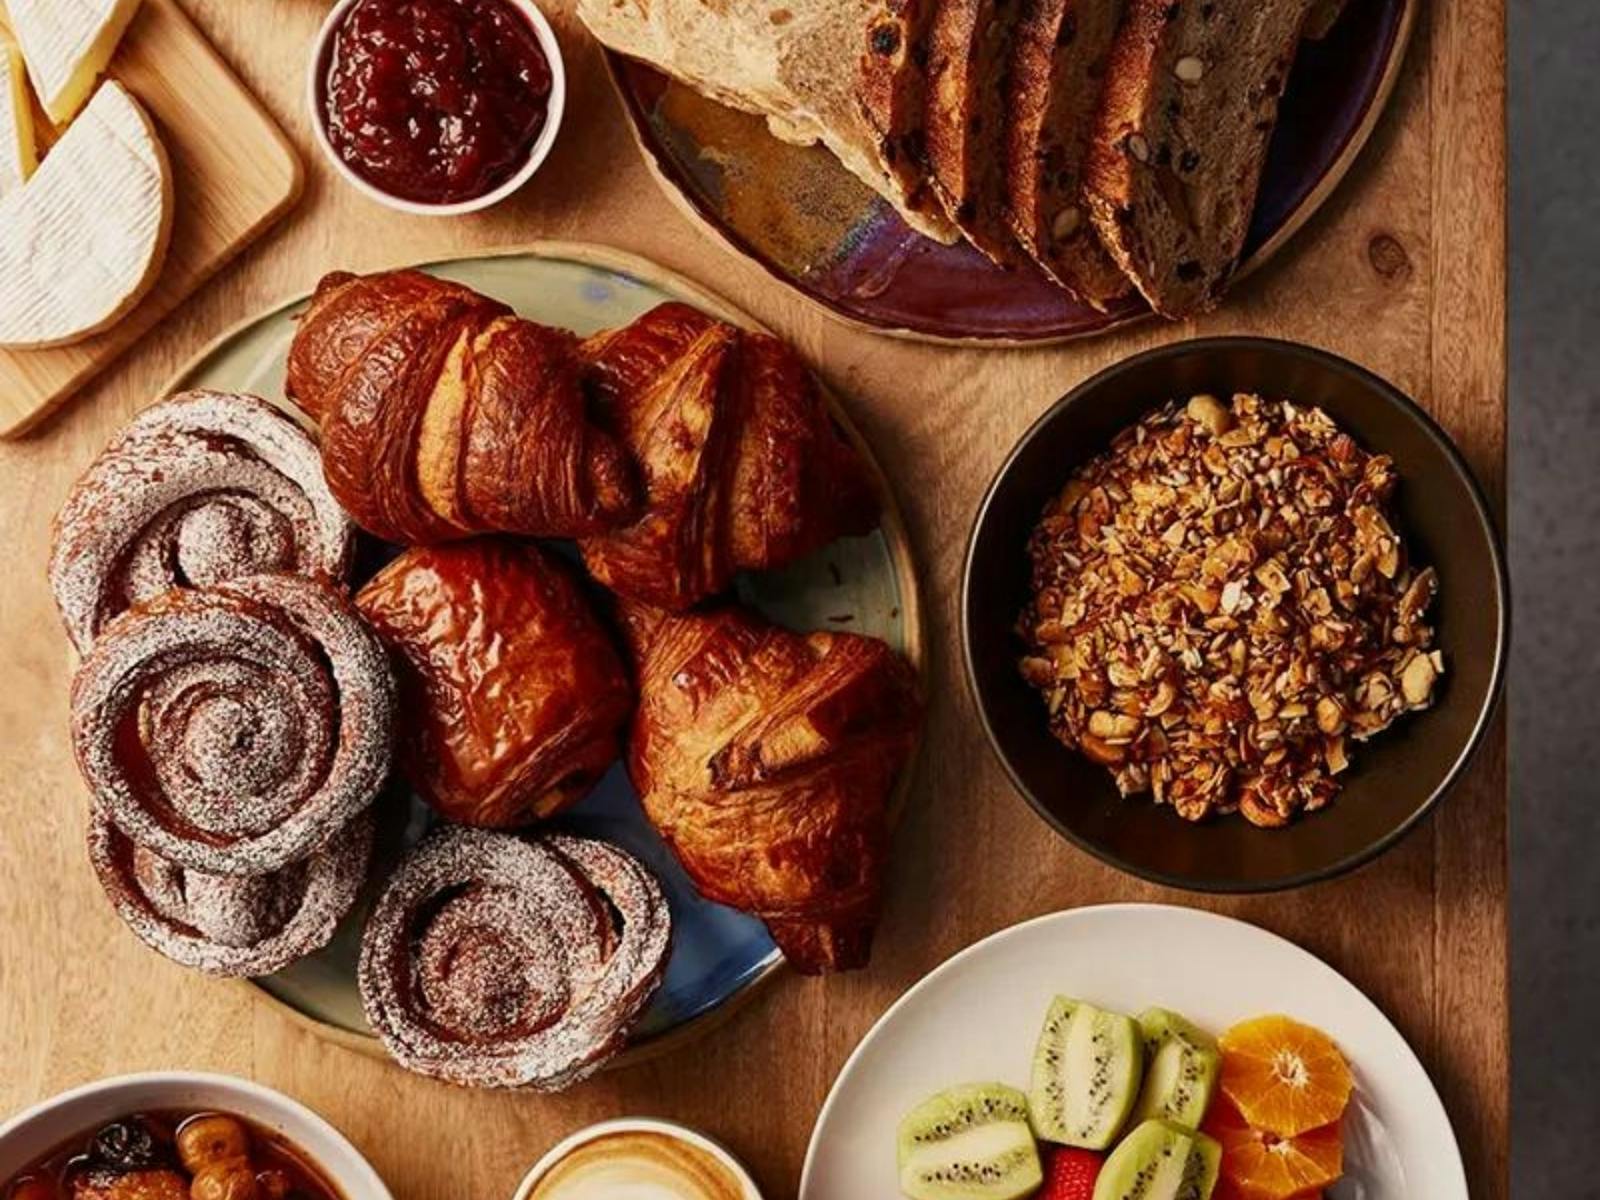 A table laden with pastries, granola, fruit, coffee, cheese, spreads and condiments.